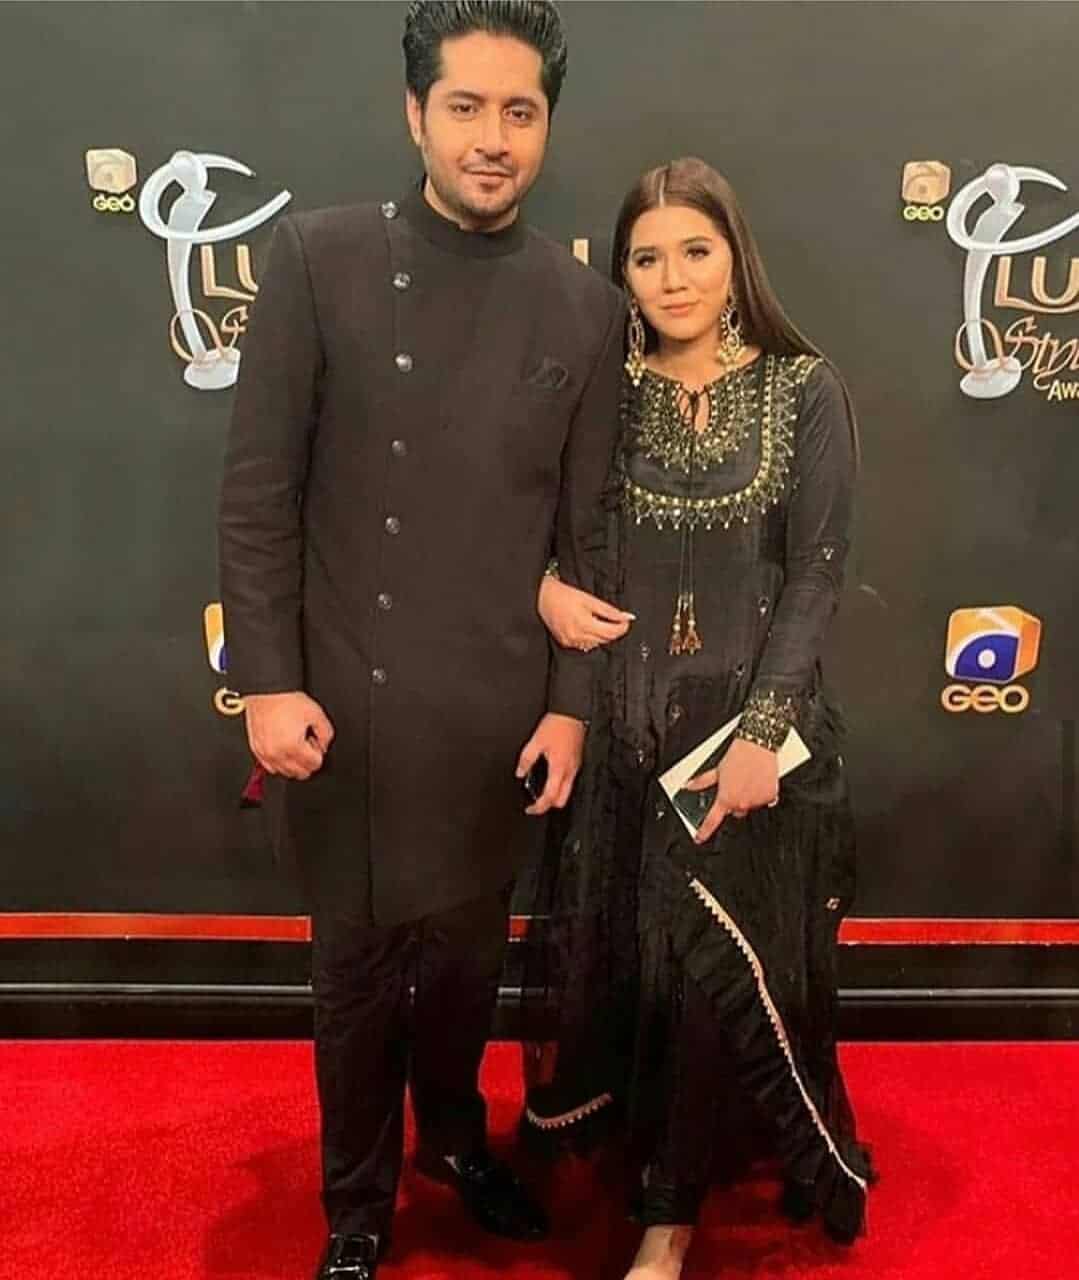 The most talented actor and writer, Imran Ashraf is all in praise for her wife's cooking skills. As soon as he had the homemade treat of a scrumptious burger, the Bhola inside Imran Ashraf appeared out to laud the cook. Here we have got further details! Imran Ashraf All in Love for Her Wife's Cooking! Well... our beloved 'Bhola' has got the treat of a scrumptious homemade burger and he is so much impressed. Imran Ashraf's wife Kiran made him this mouthwatering meal and the Bhola inside him couldn't resist to commend her. Here we have got the video! Imran Ashraf & Wife Kiran Imran tied the knot with Kiran Ashfaq in Kuala Lumpur, Malaysia during 2018. A number of Pakistani celebrities graced his wedding with their presence. These celebrities included Humayun Saeed, Muneeb Butt, and Asma Abbas. The couple has a baby boy, Roham Imran. About Imran Imran Ashraf, famously known as Bhola, is an amazing actor and now he is marking his brilliance as a writer. He is the mastermind behind the amazing drama serial Mushk that goes on-air on Hum TV every Saturday at 08:00 PM. The selection of cast, production, hues of culture, and most importantly the dialogues are spellbinding viewers with every new episode.  He has worked in different drama serials in challenging roles. These drama serials include: Ranjha Ranjha Kardi Dil Mom Ka Diya Alif Allah aur Insan Gul-e-Ranaa Dil Lagi Tabeer Kahin Deep Jaley What's So Special About Mushk? Drama serial Mushk is something rich in love and cares with a fine traditional touch that has been missing from other dramas for a long. Just having a thought of this drama after watching its trailer makes one fall in nostalgia when love stories were all about hardships. The name “Mushk” basically depicts the essence of love which either gets stronger or dilutes with the passage of time.